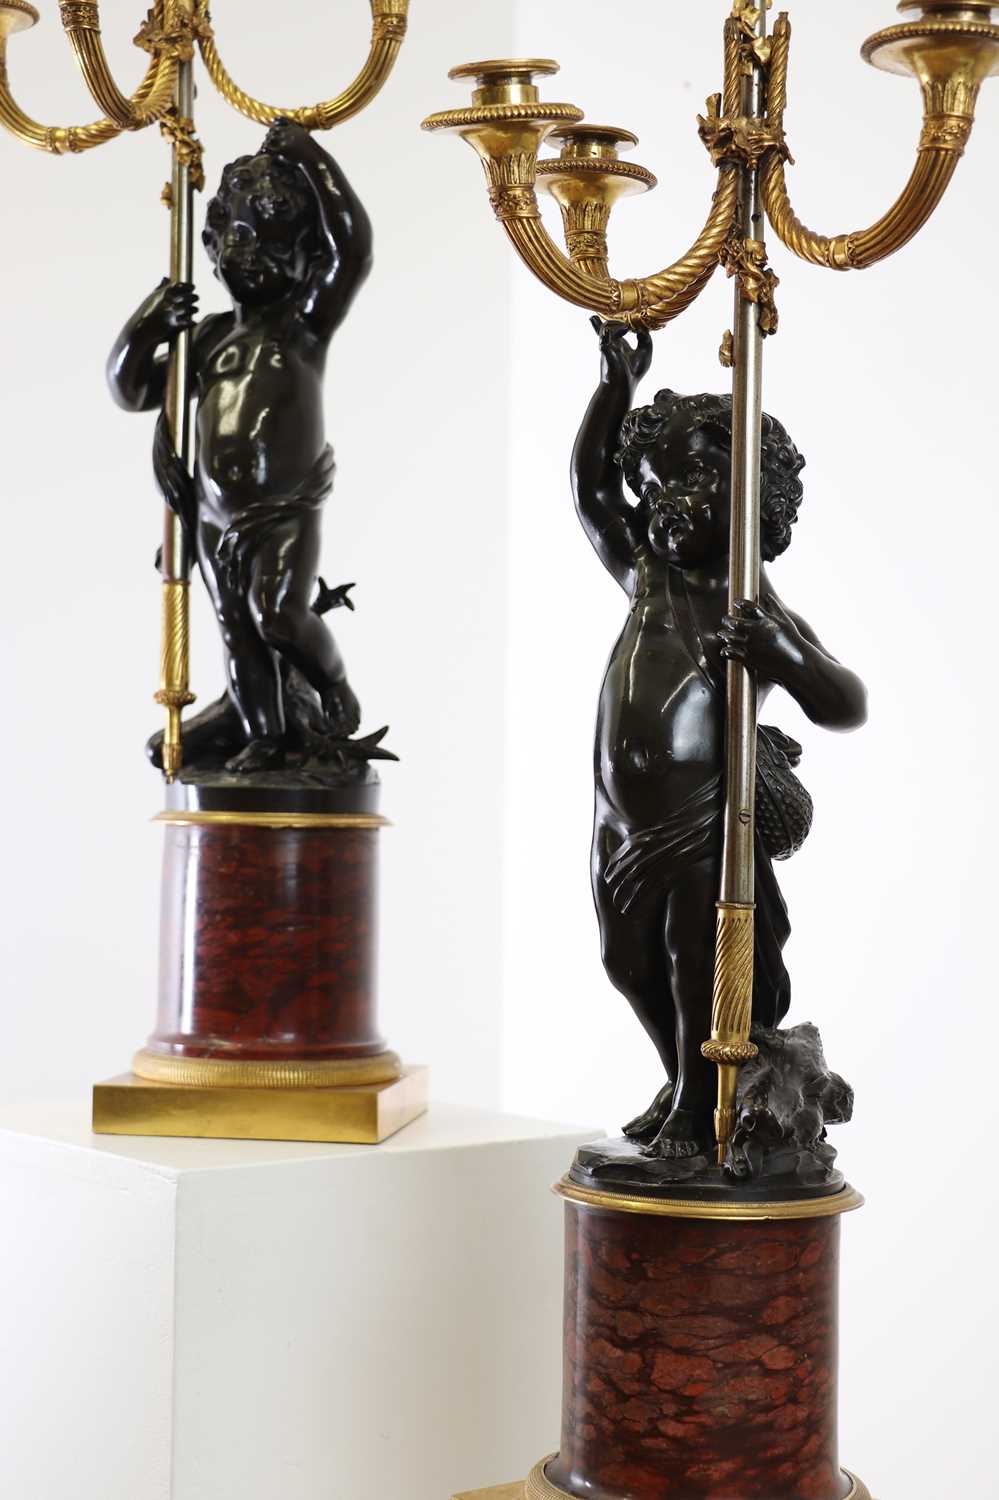 A pair of French Empire bronze and marble candelabra attributed to François Rémond (c.1747-1812),